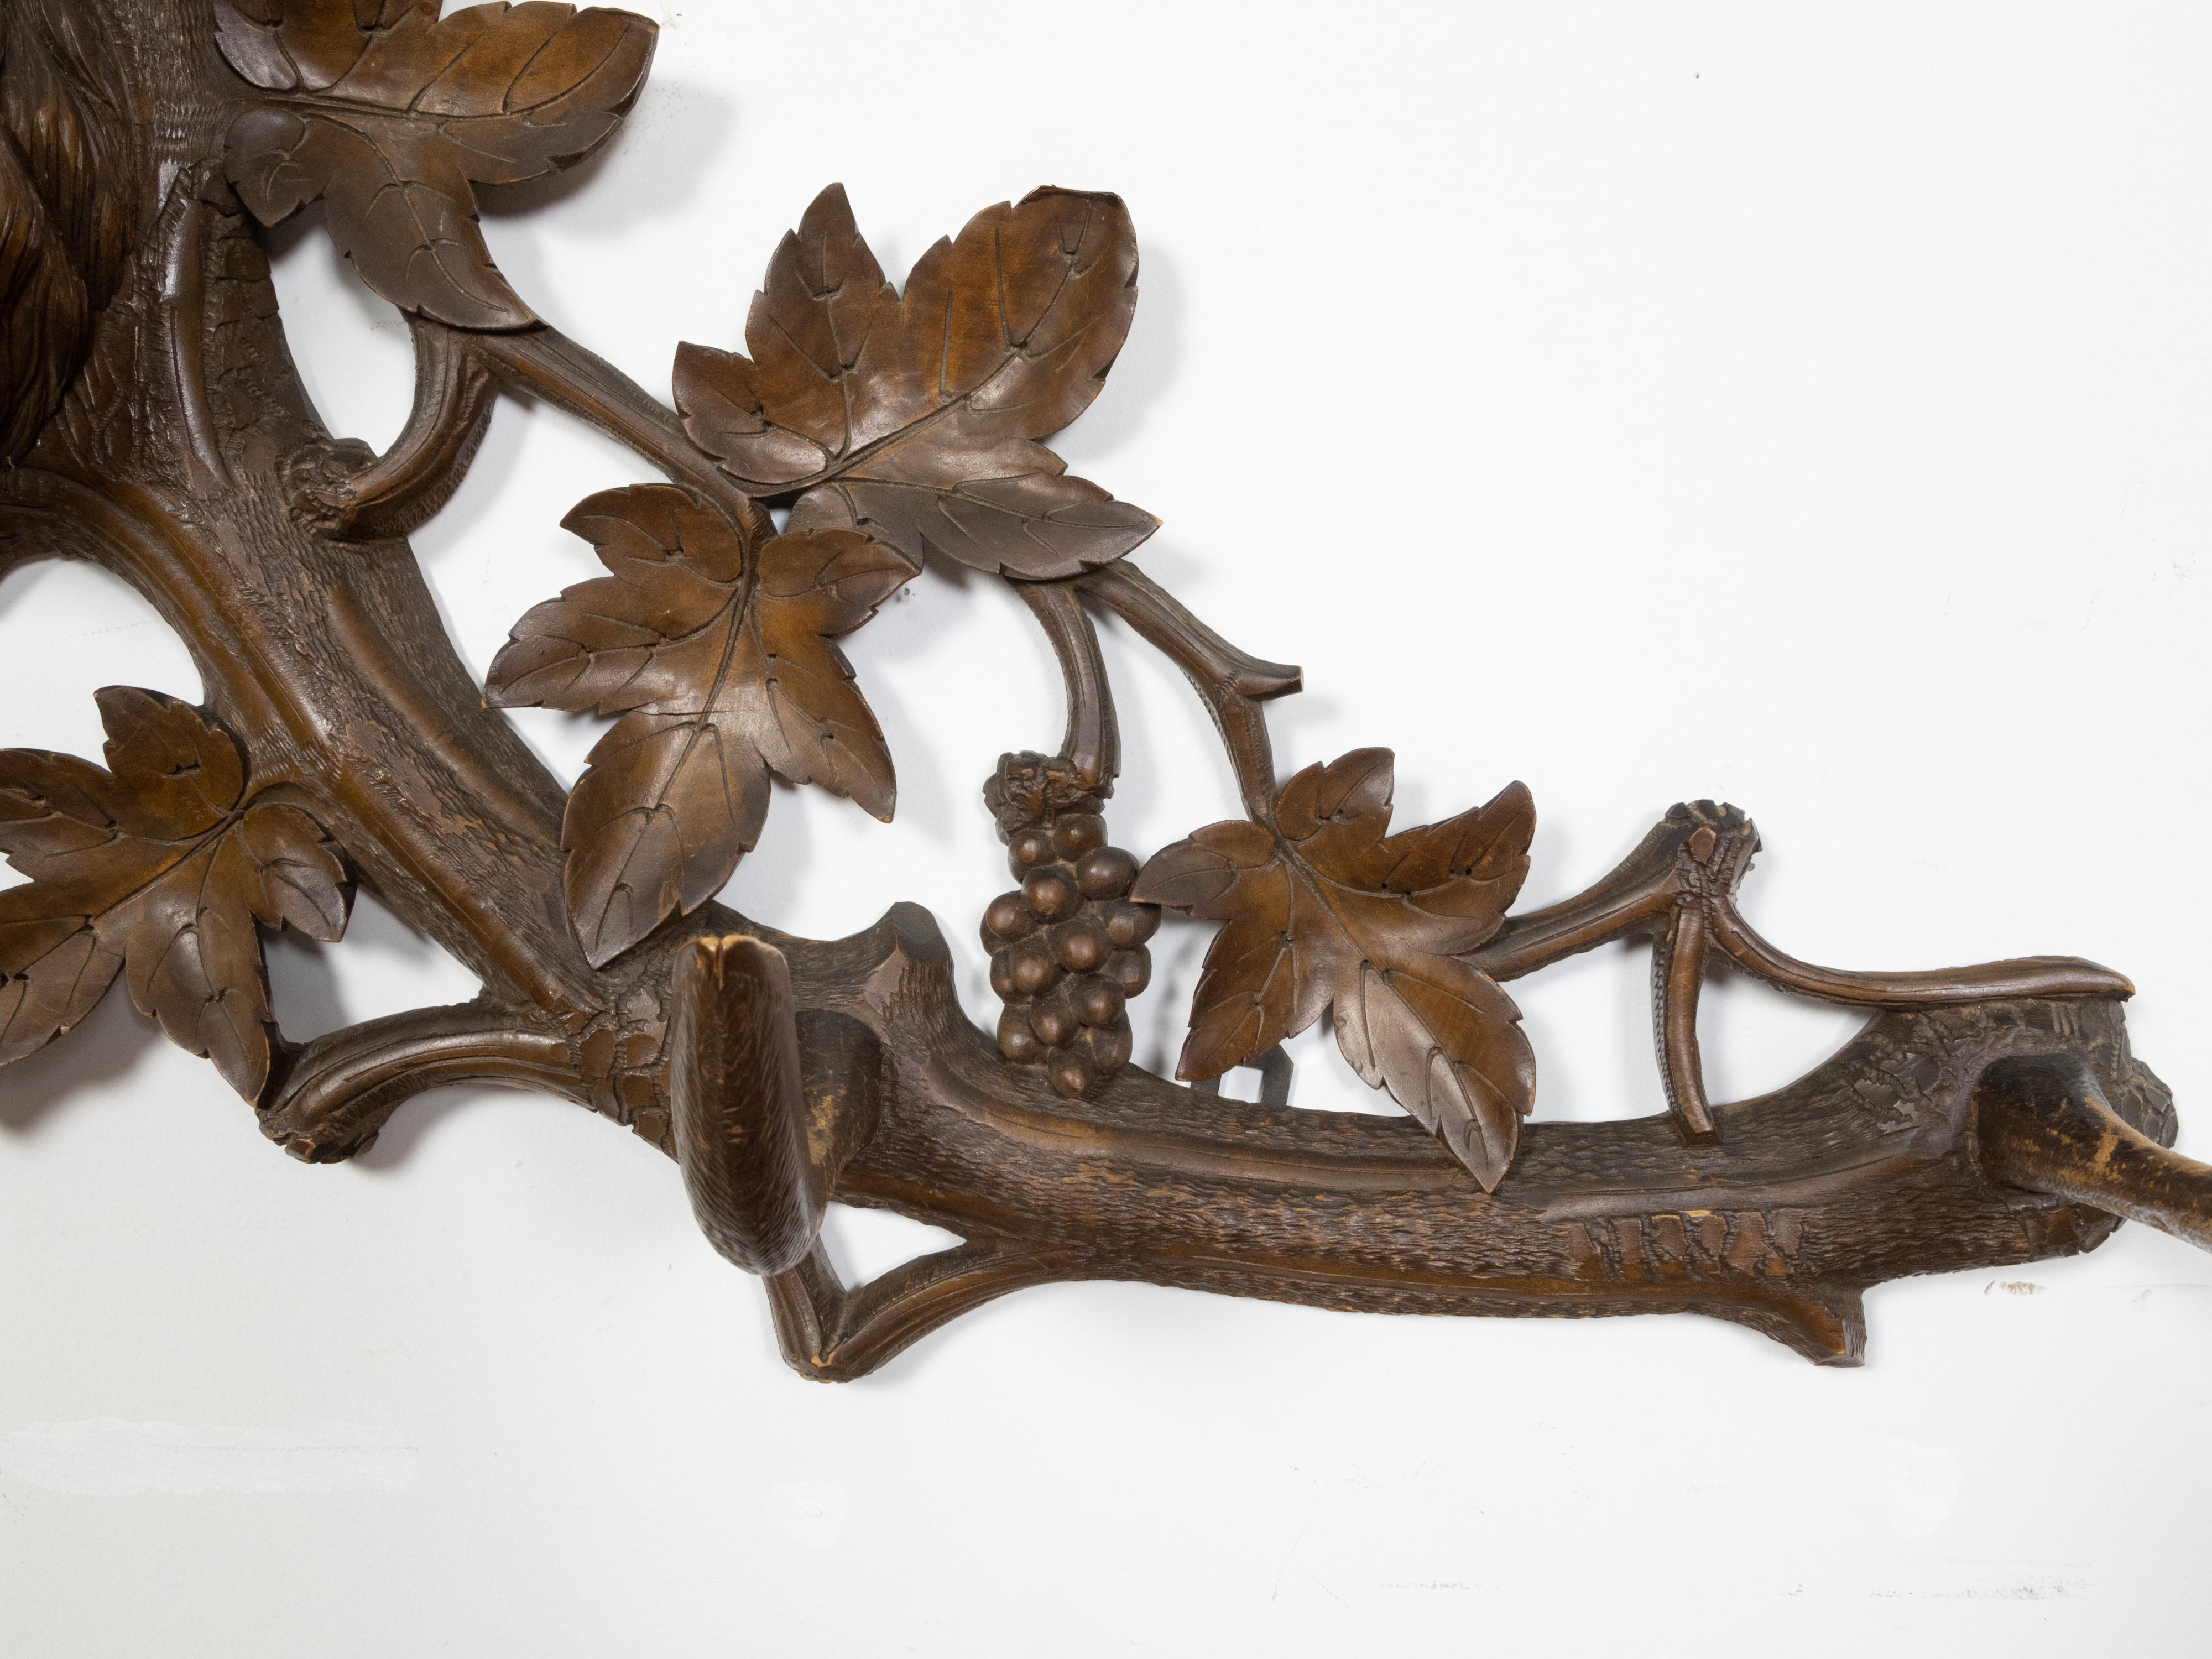 20th Century Black Forest Four-Hook Coat Hanger with Hand-Carved Stag Head and Grapevines